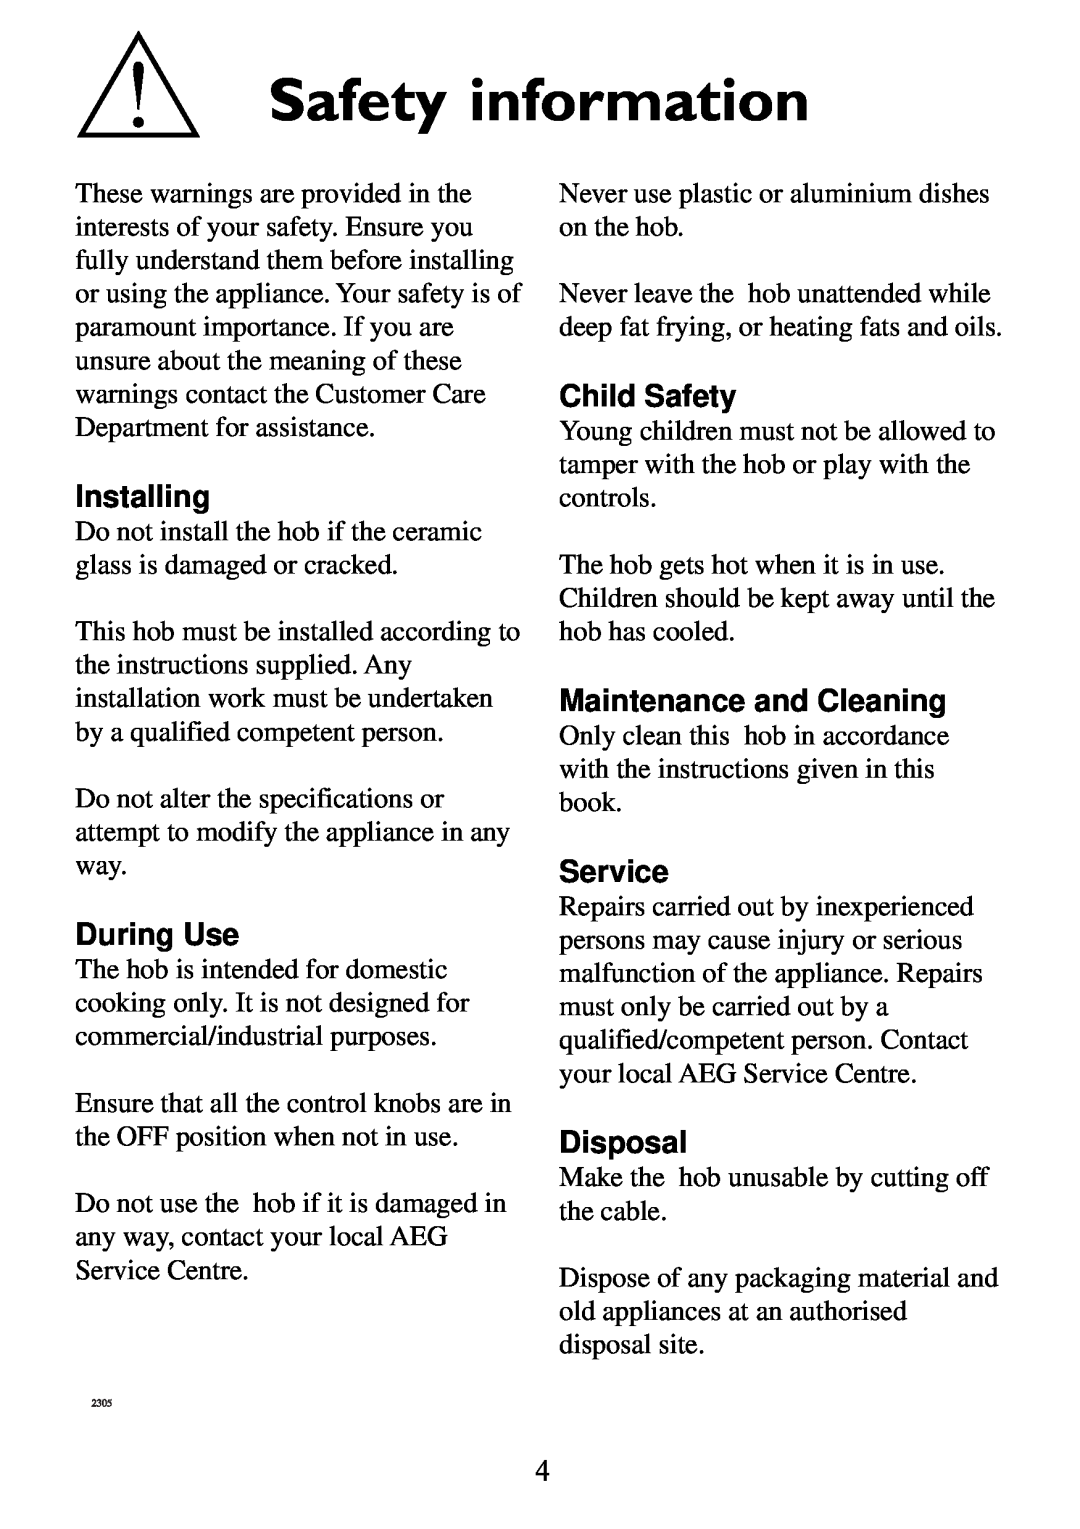 Electrolux Gas hob Safety information, Installing, During Use, Child Safety, Maintenance and Cleaning, Service, Disposal 